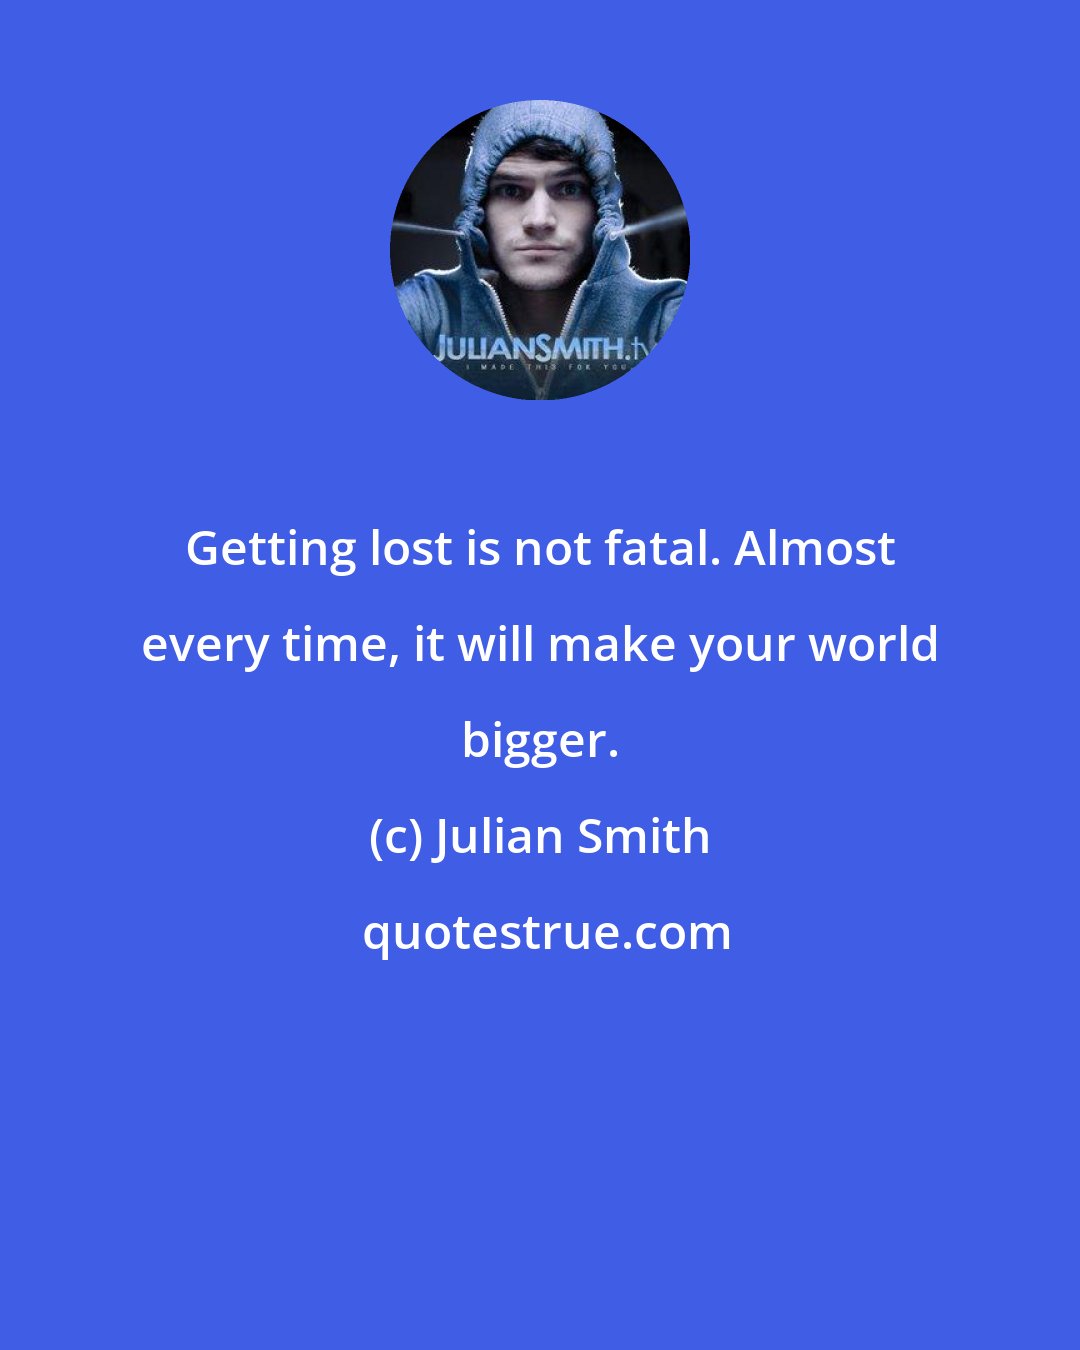 Julian Smith: Getting lost is not fatal. Almost every time, it will make your world bigger.